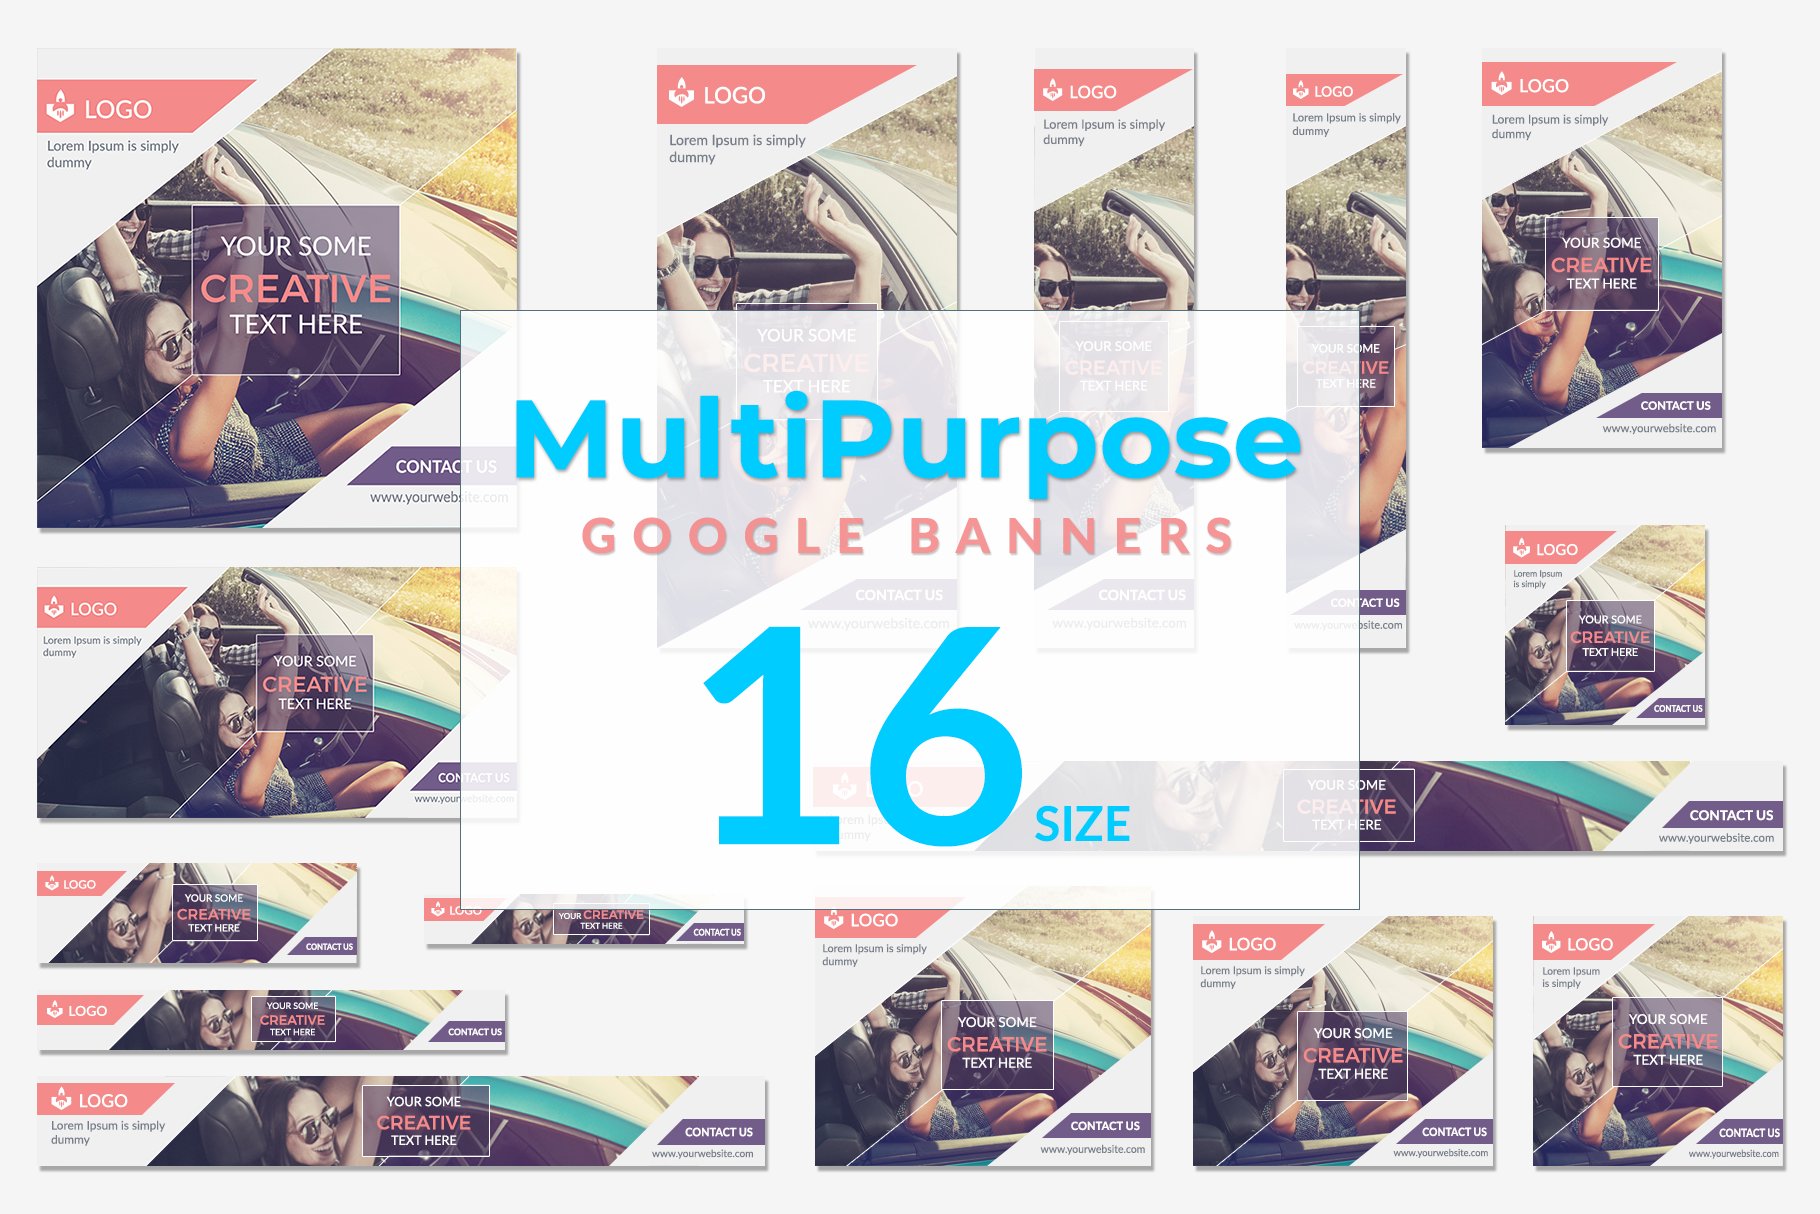 Multipurpose Banners cover image.